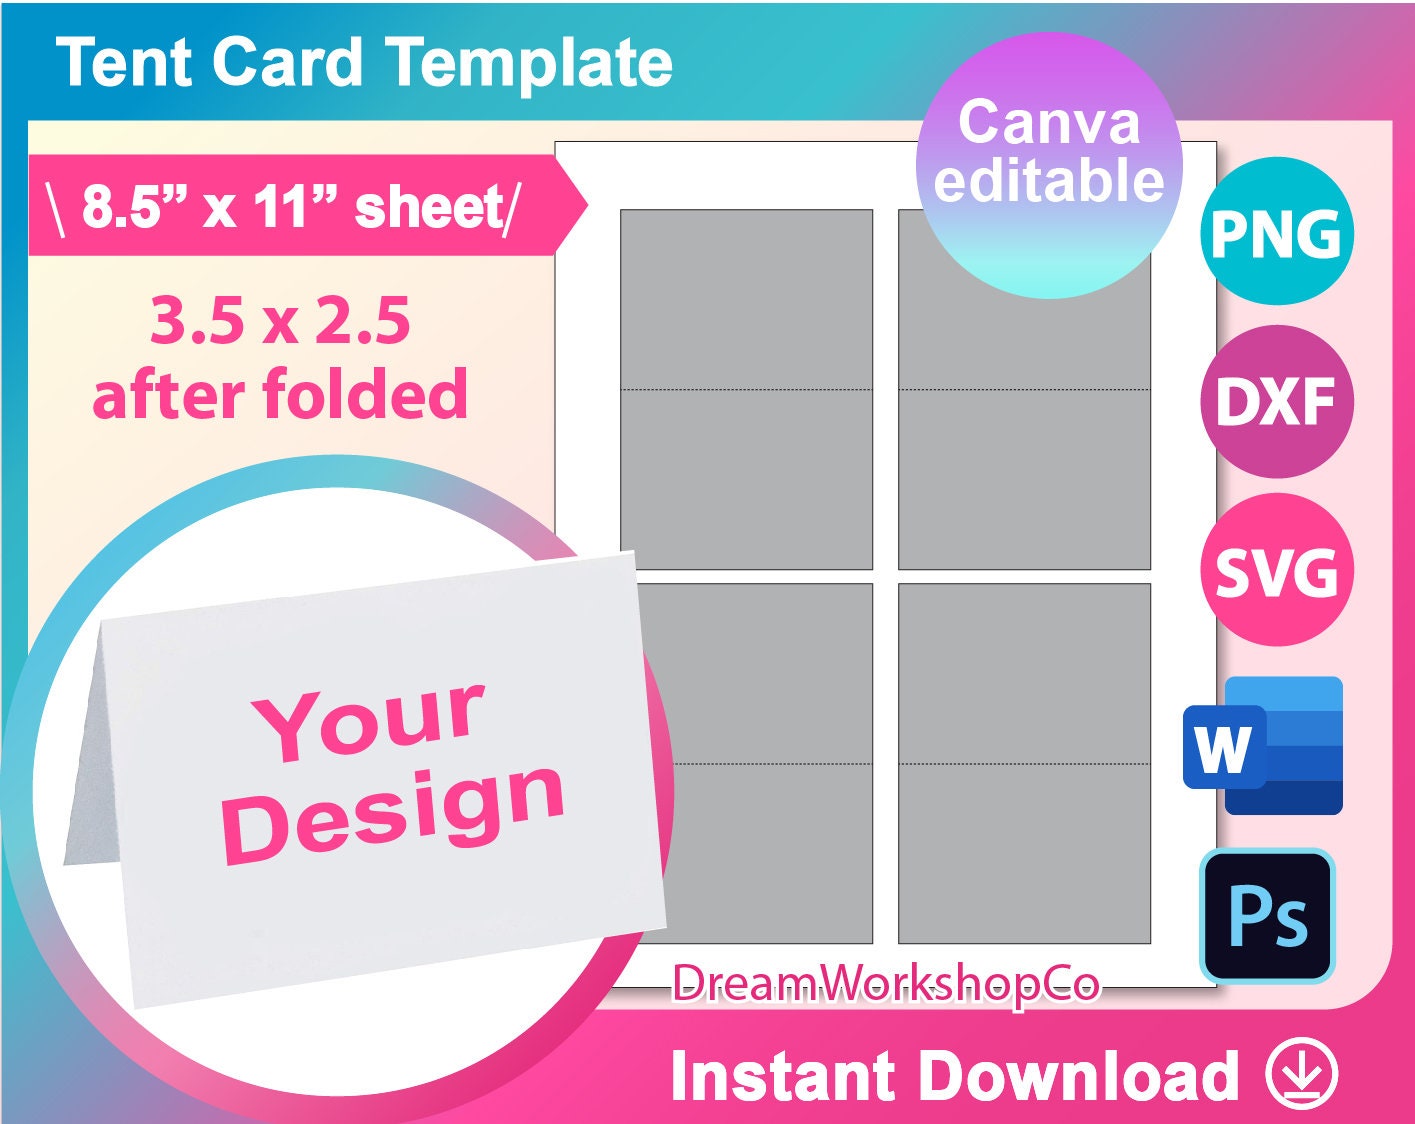 tent-card-template-food-label-card-svg-dxf-canva-ms-word-docx-png-psd-sheet-printable